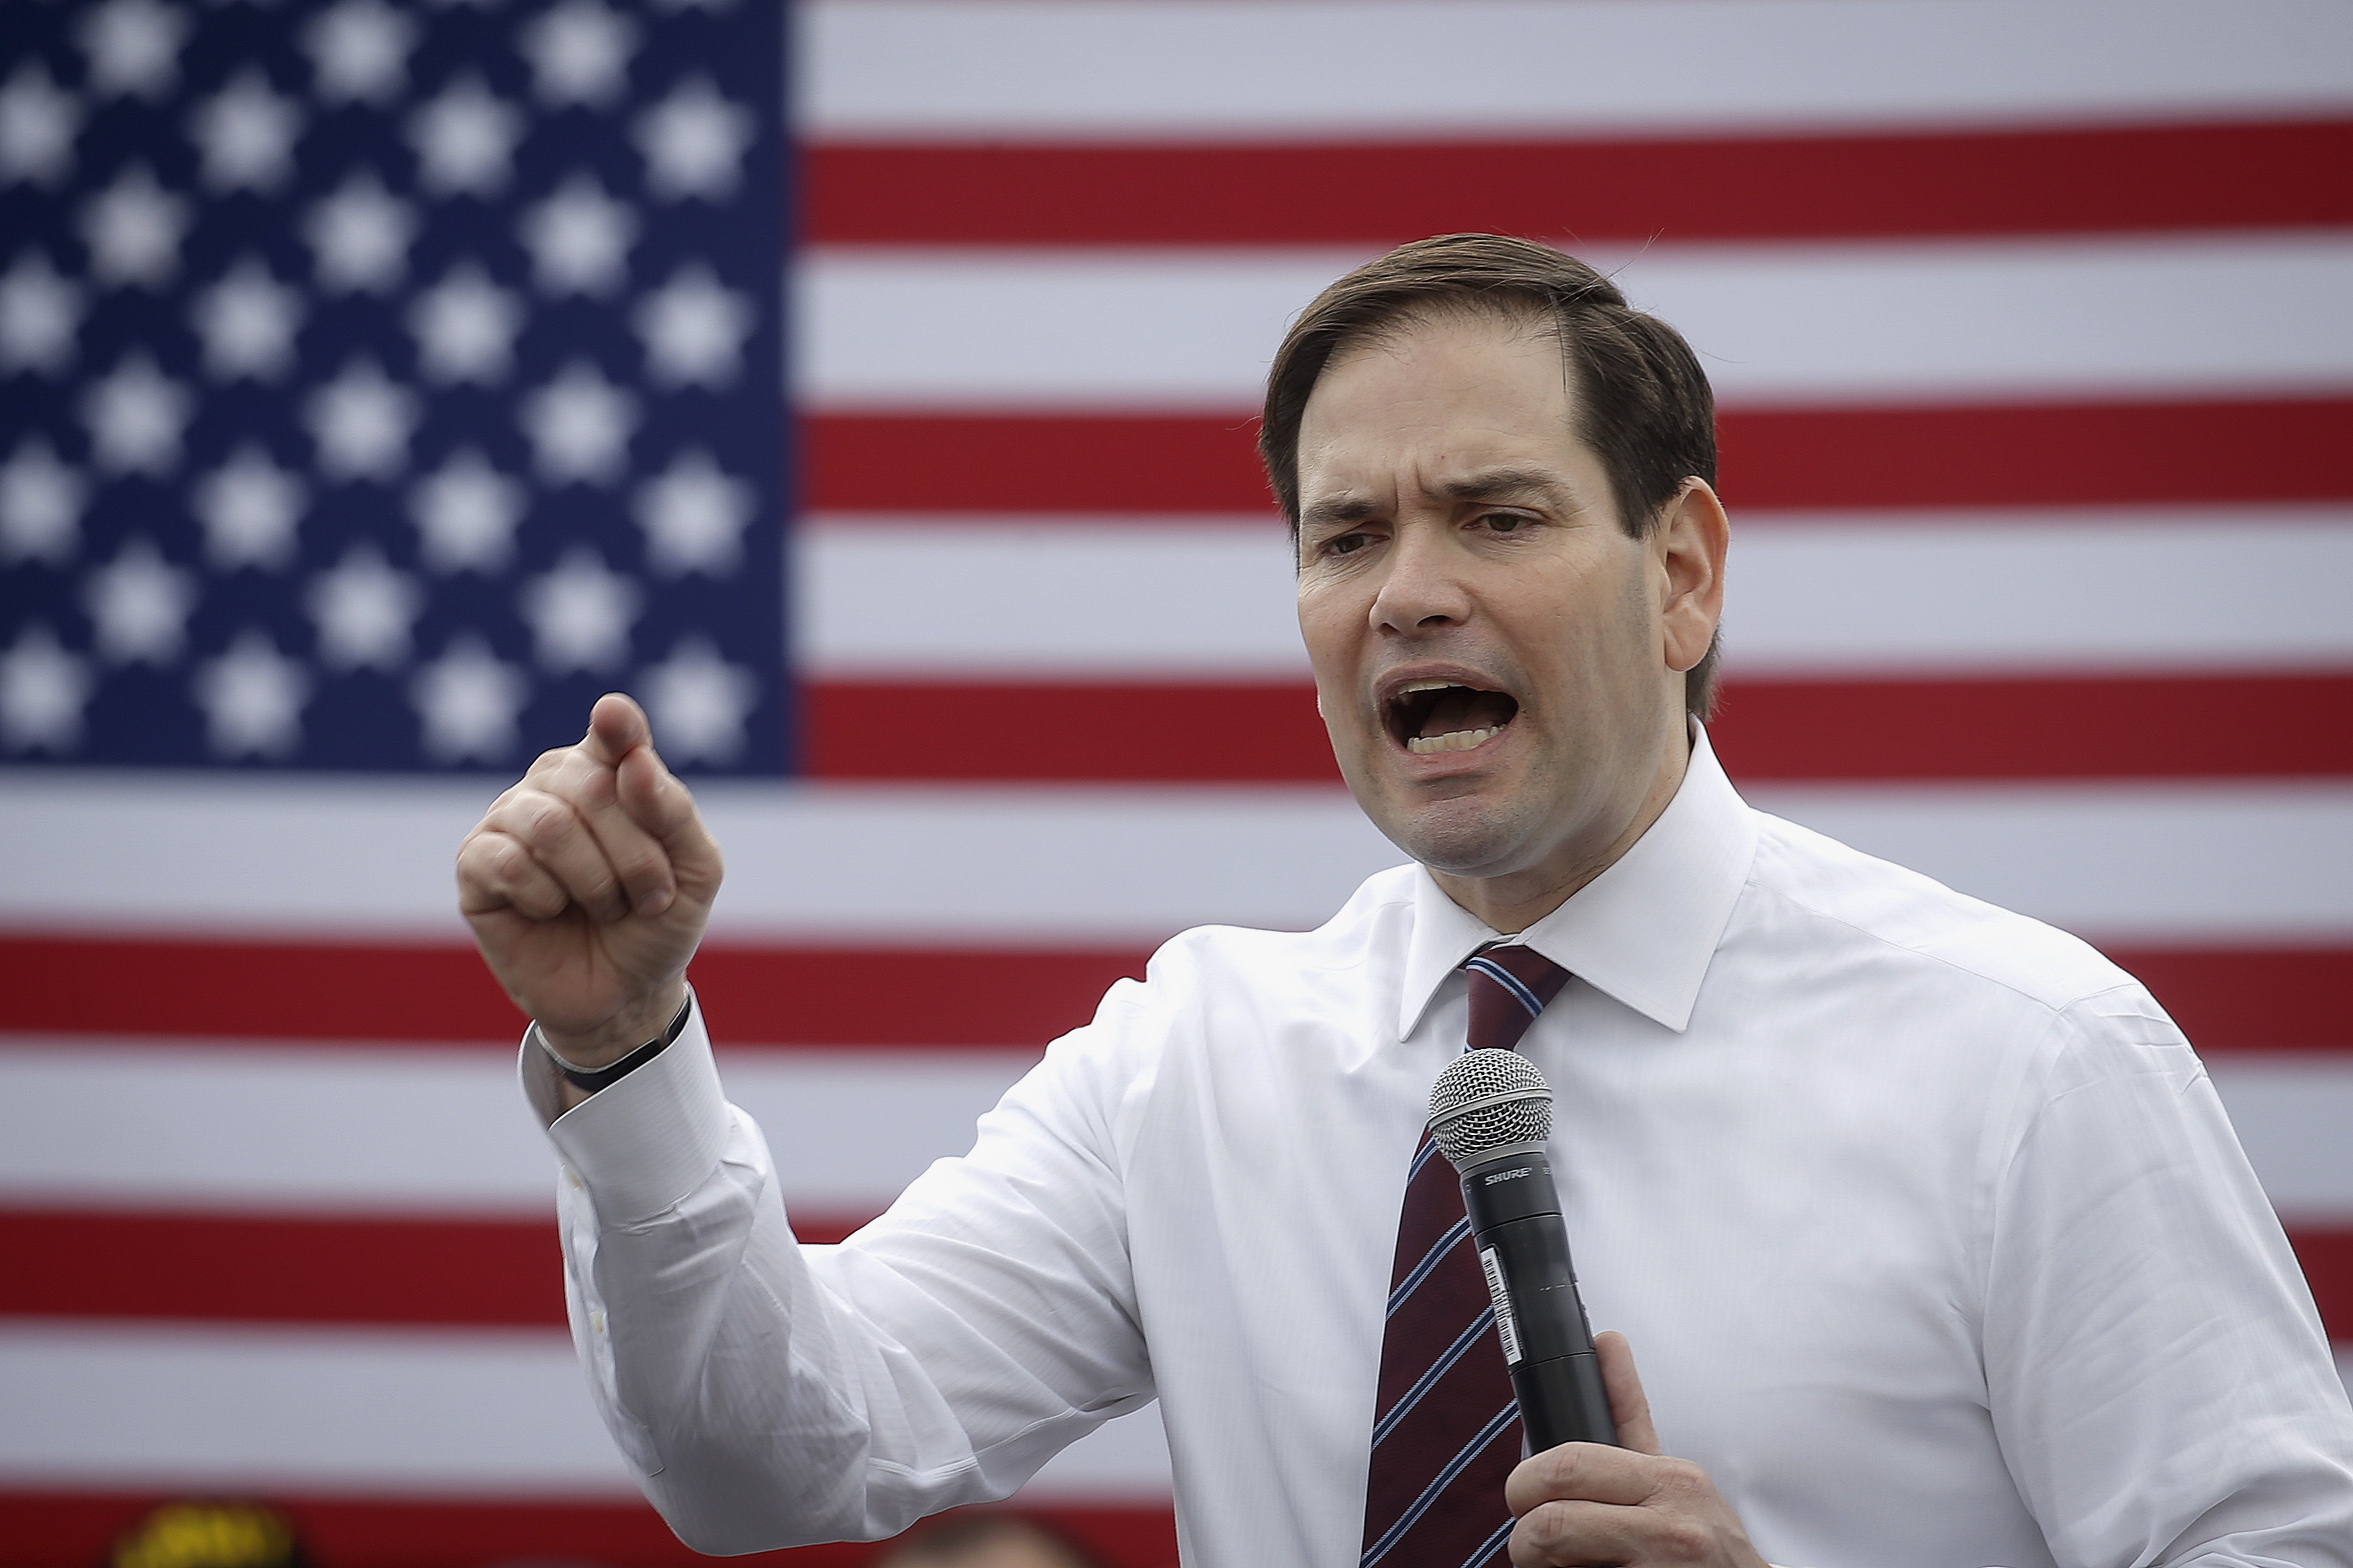 Marco Rubio would have put up a great fight.